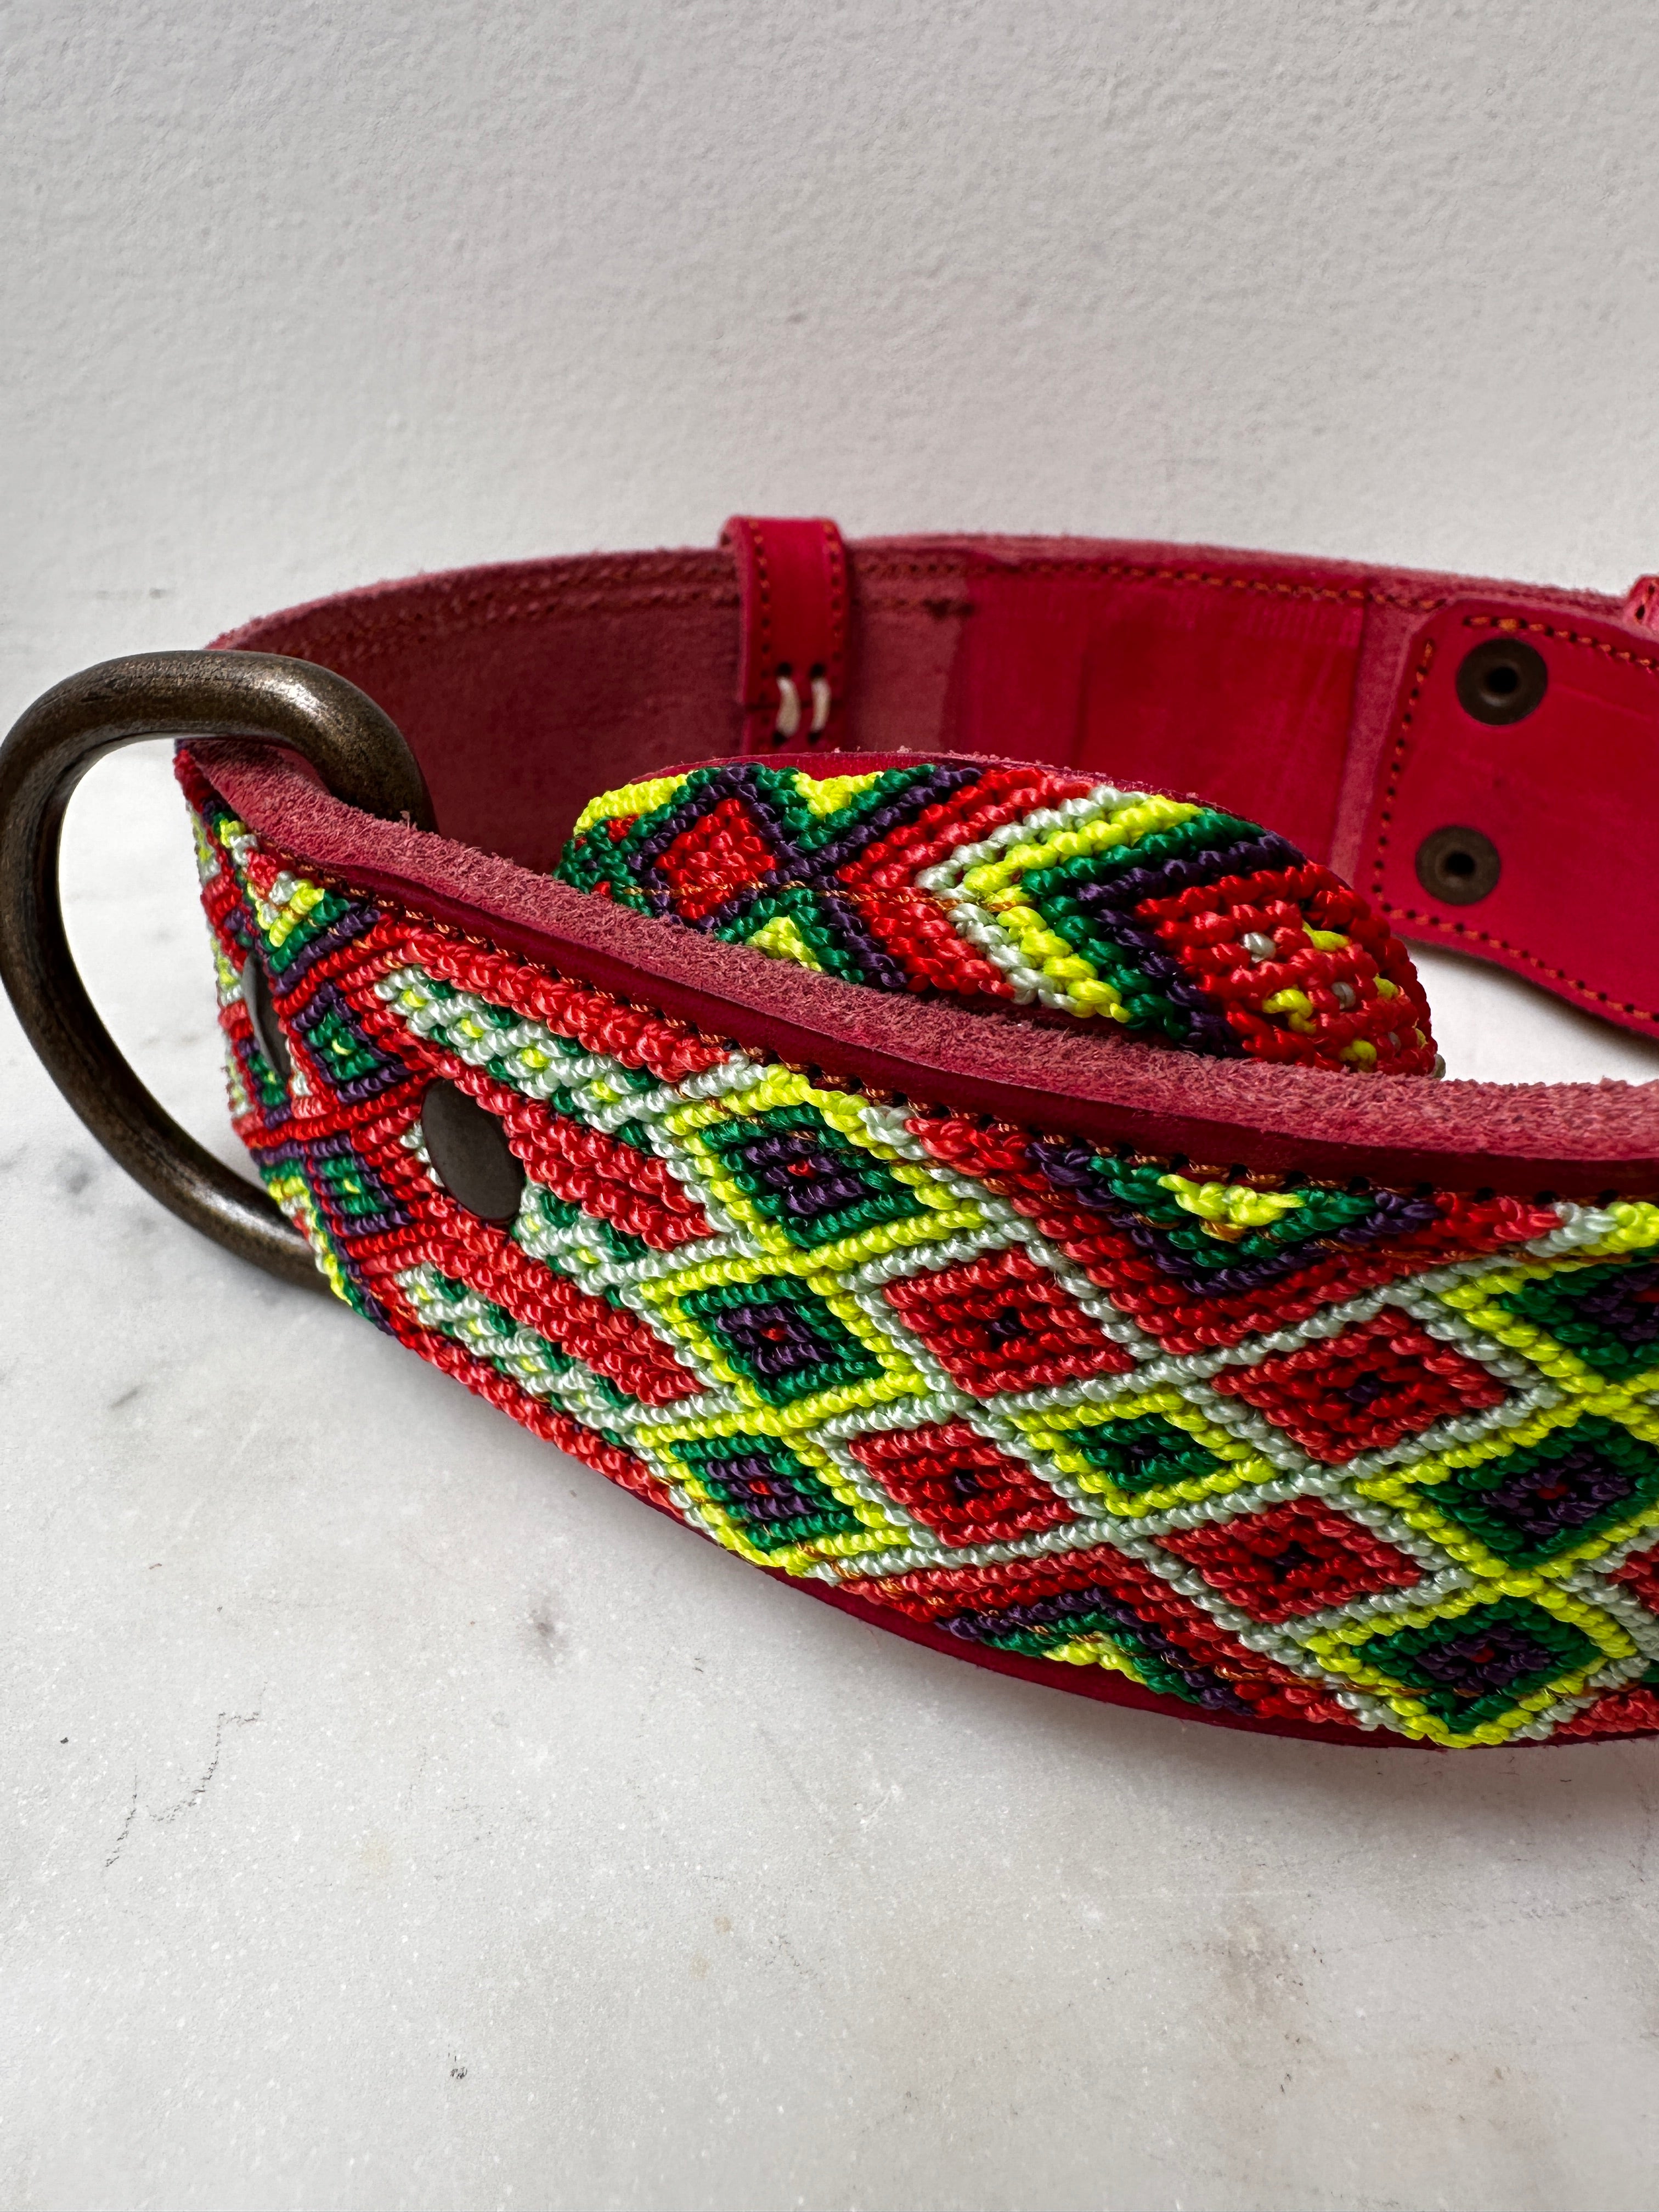 Future Nomads Homewares One Size Huichol Leather Wide Dog Collar L6